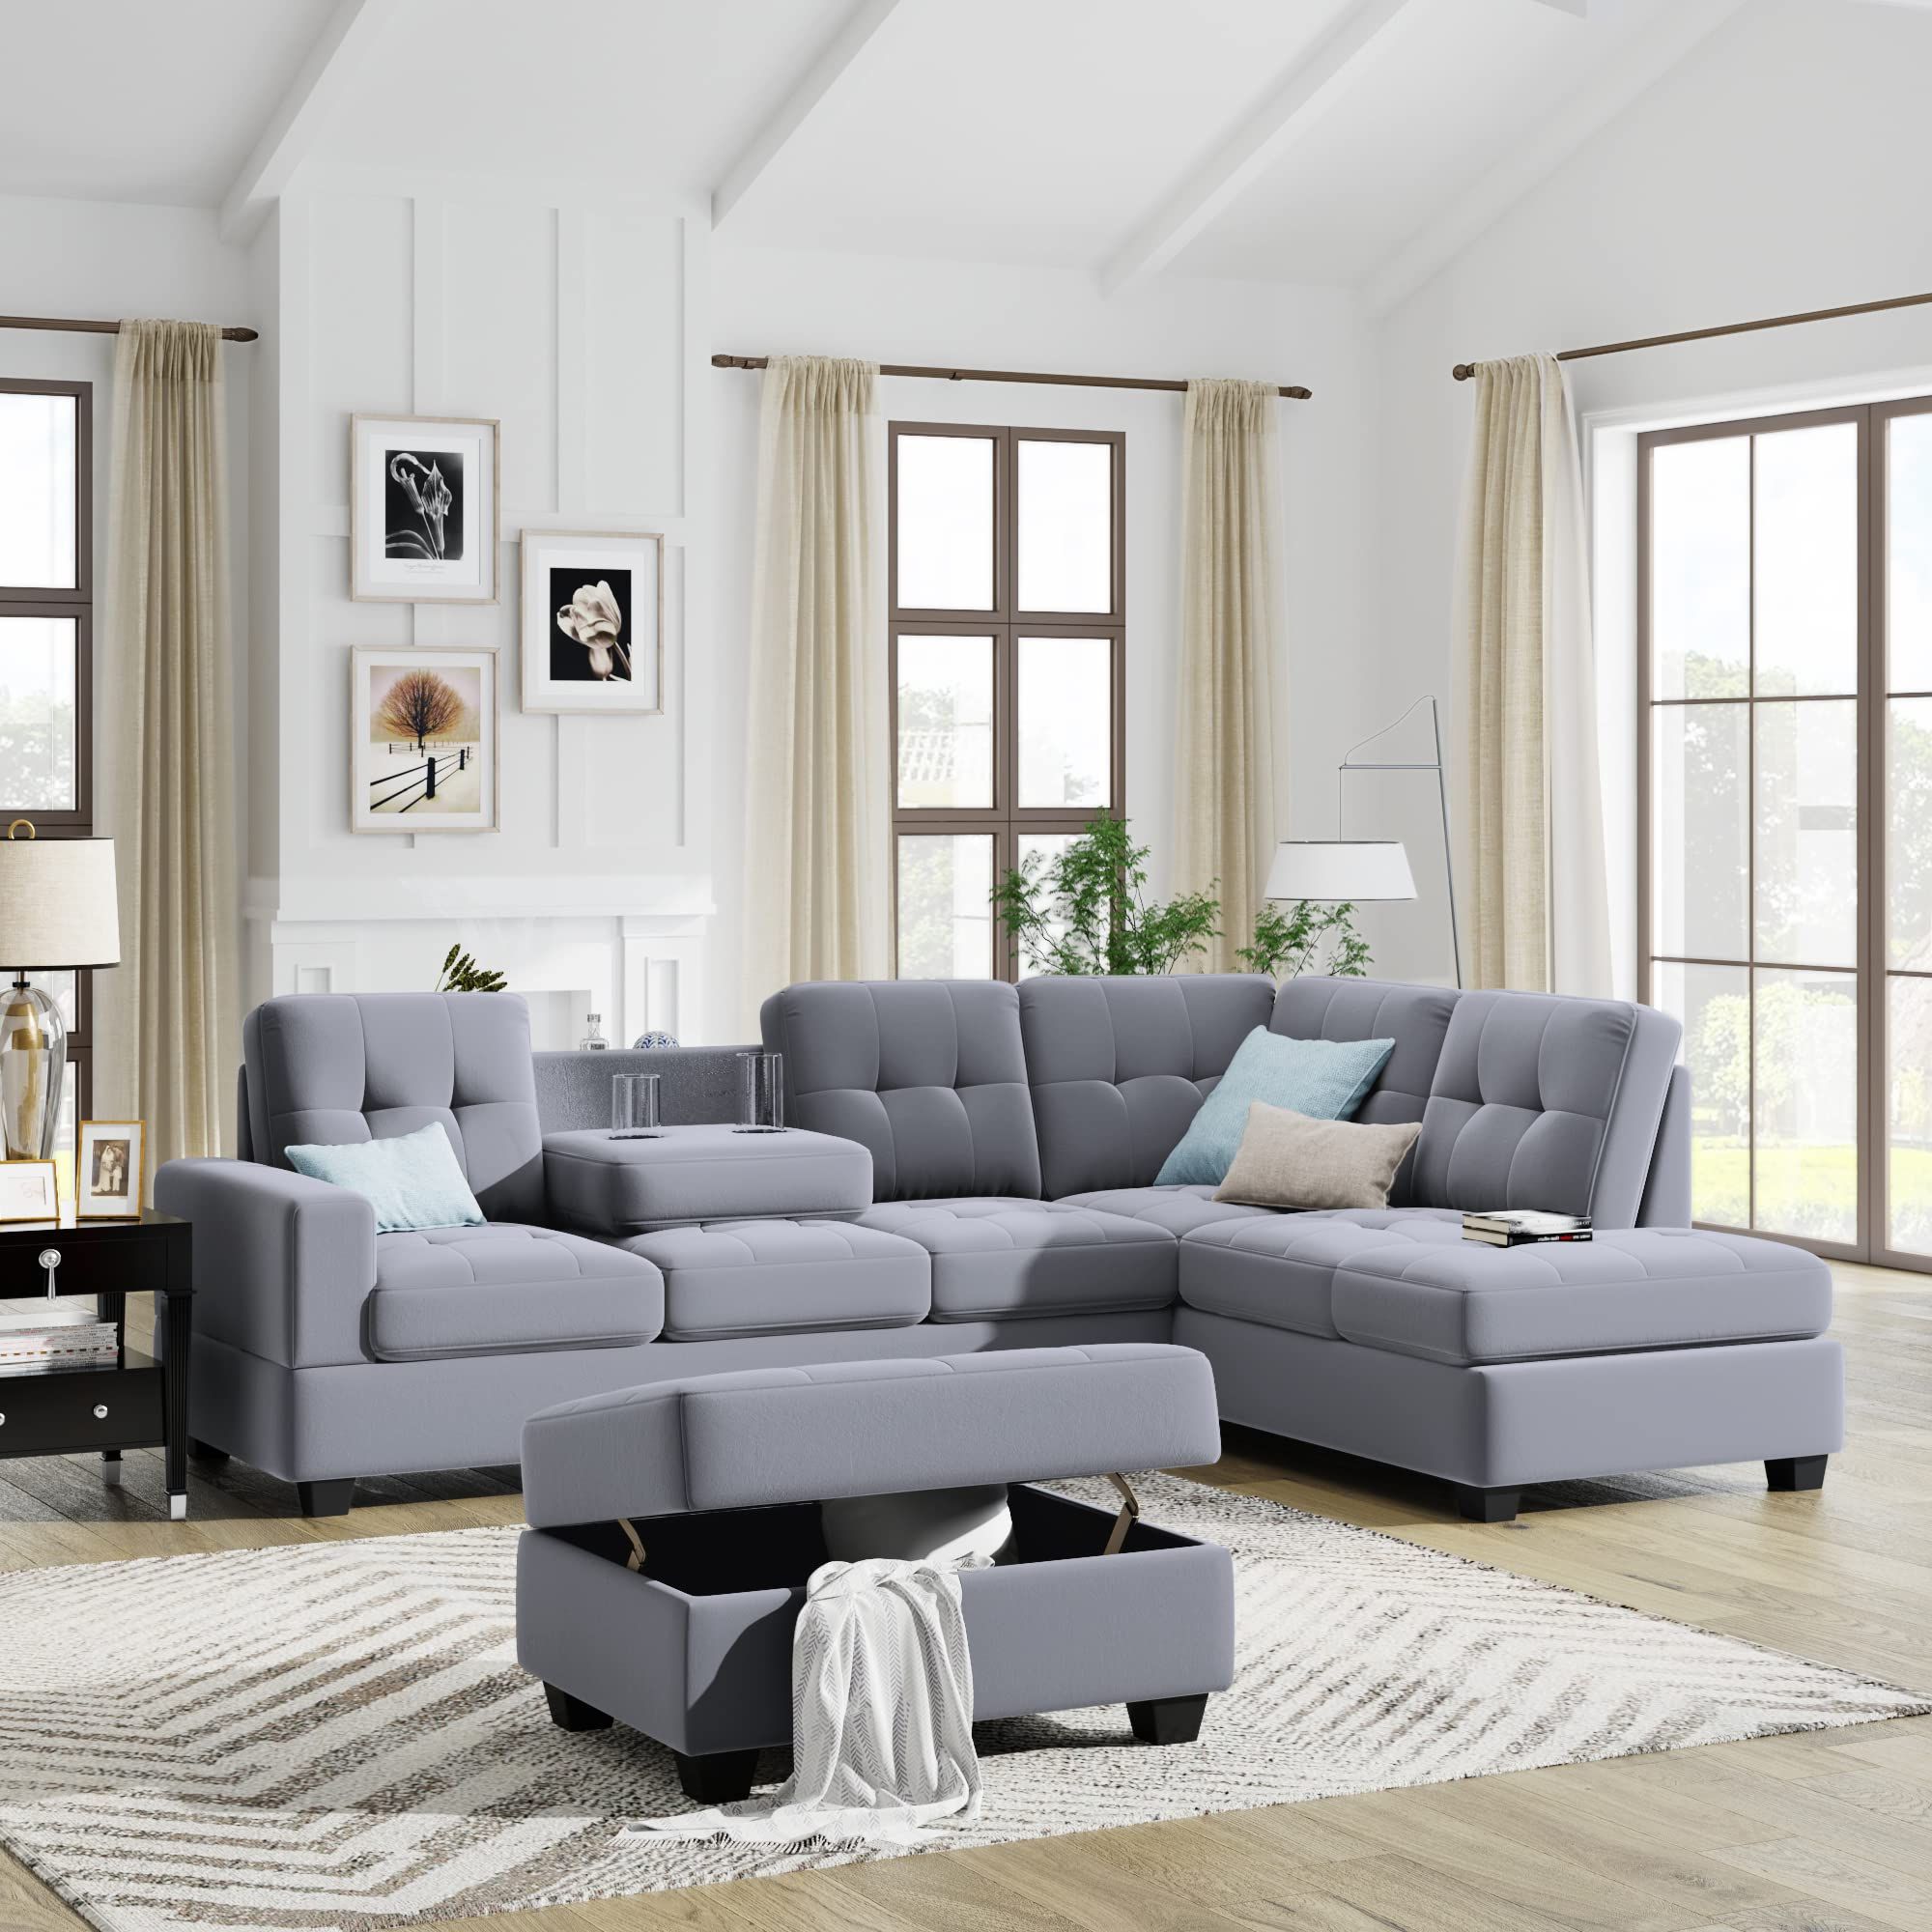 Harper & Bright Designs Sectional Sofa Set, L Shape Sofa With Storage Regarding Best And Newest L Shape Couches With Reversible Chaises (View 13 of 15)